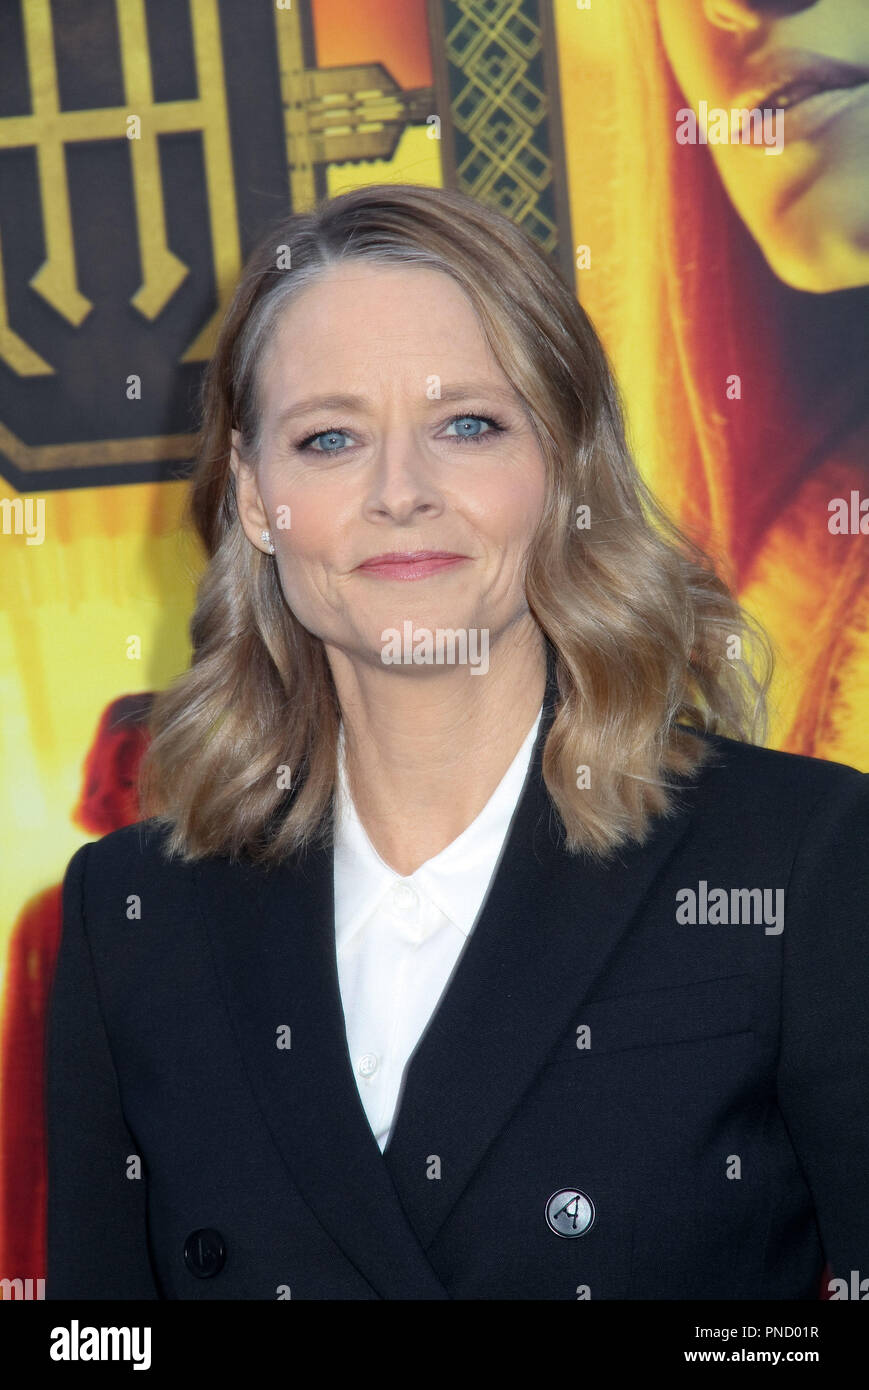 Jodie Foster  05/19/2018 The Los Angeles premiere of 'Hotel Artemis' held at the Regency Bruin Theatre in Los Angeles, CA Photo by Izumi Hasegawa / HNW / PictureLux Stock Photo